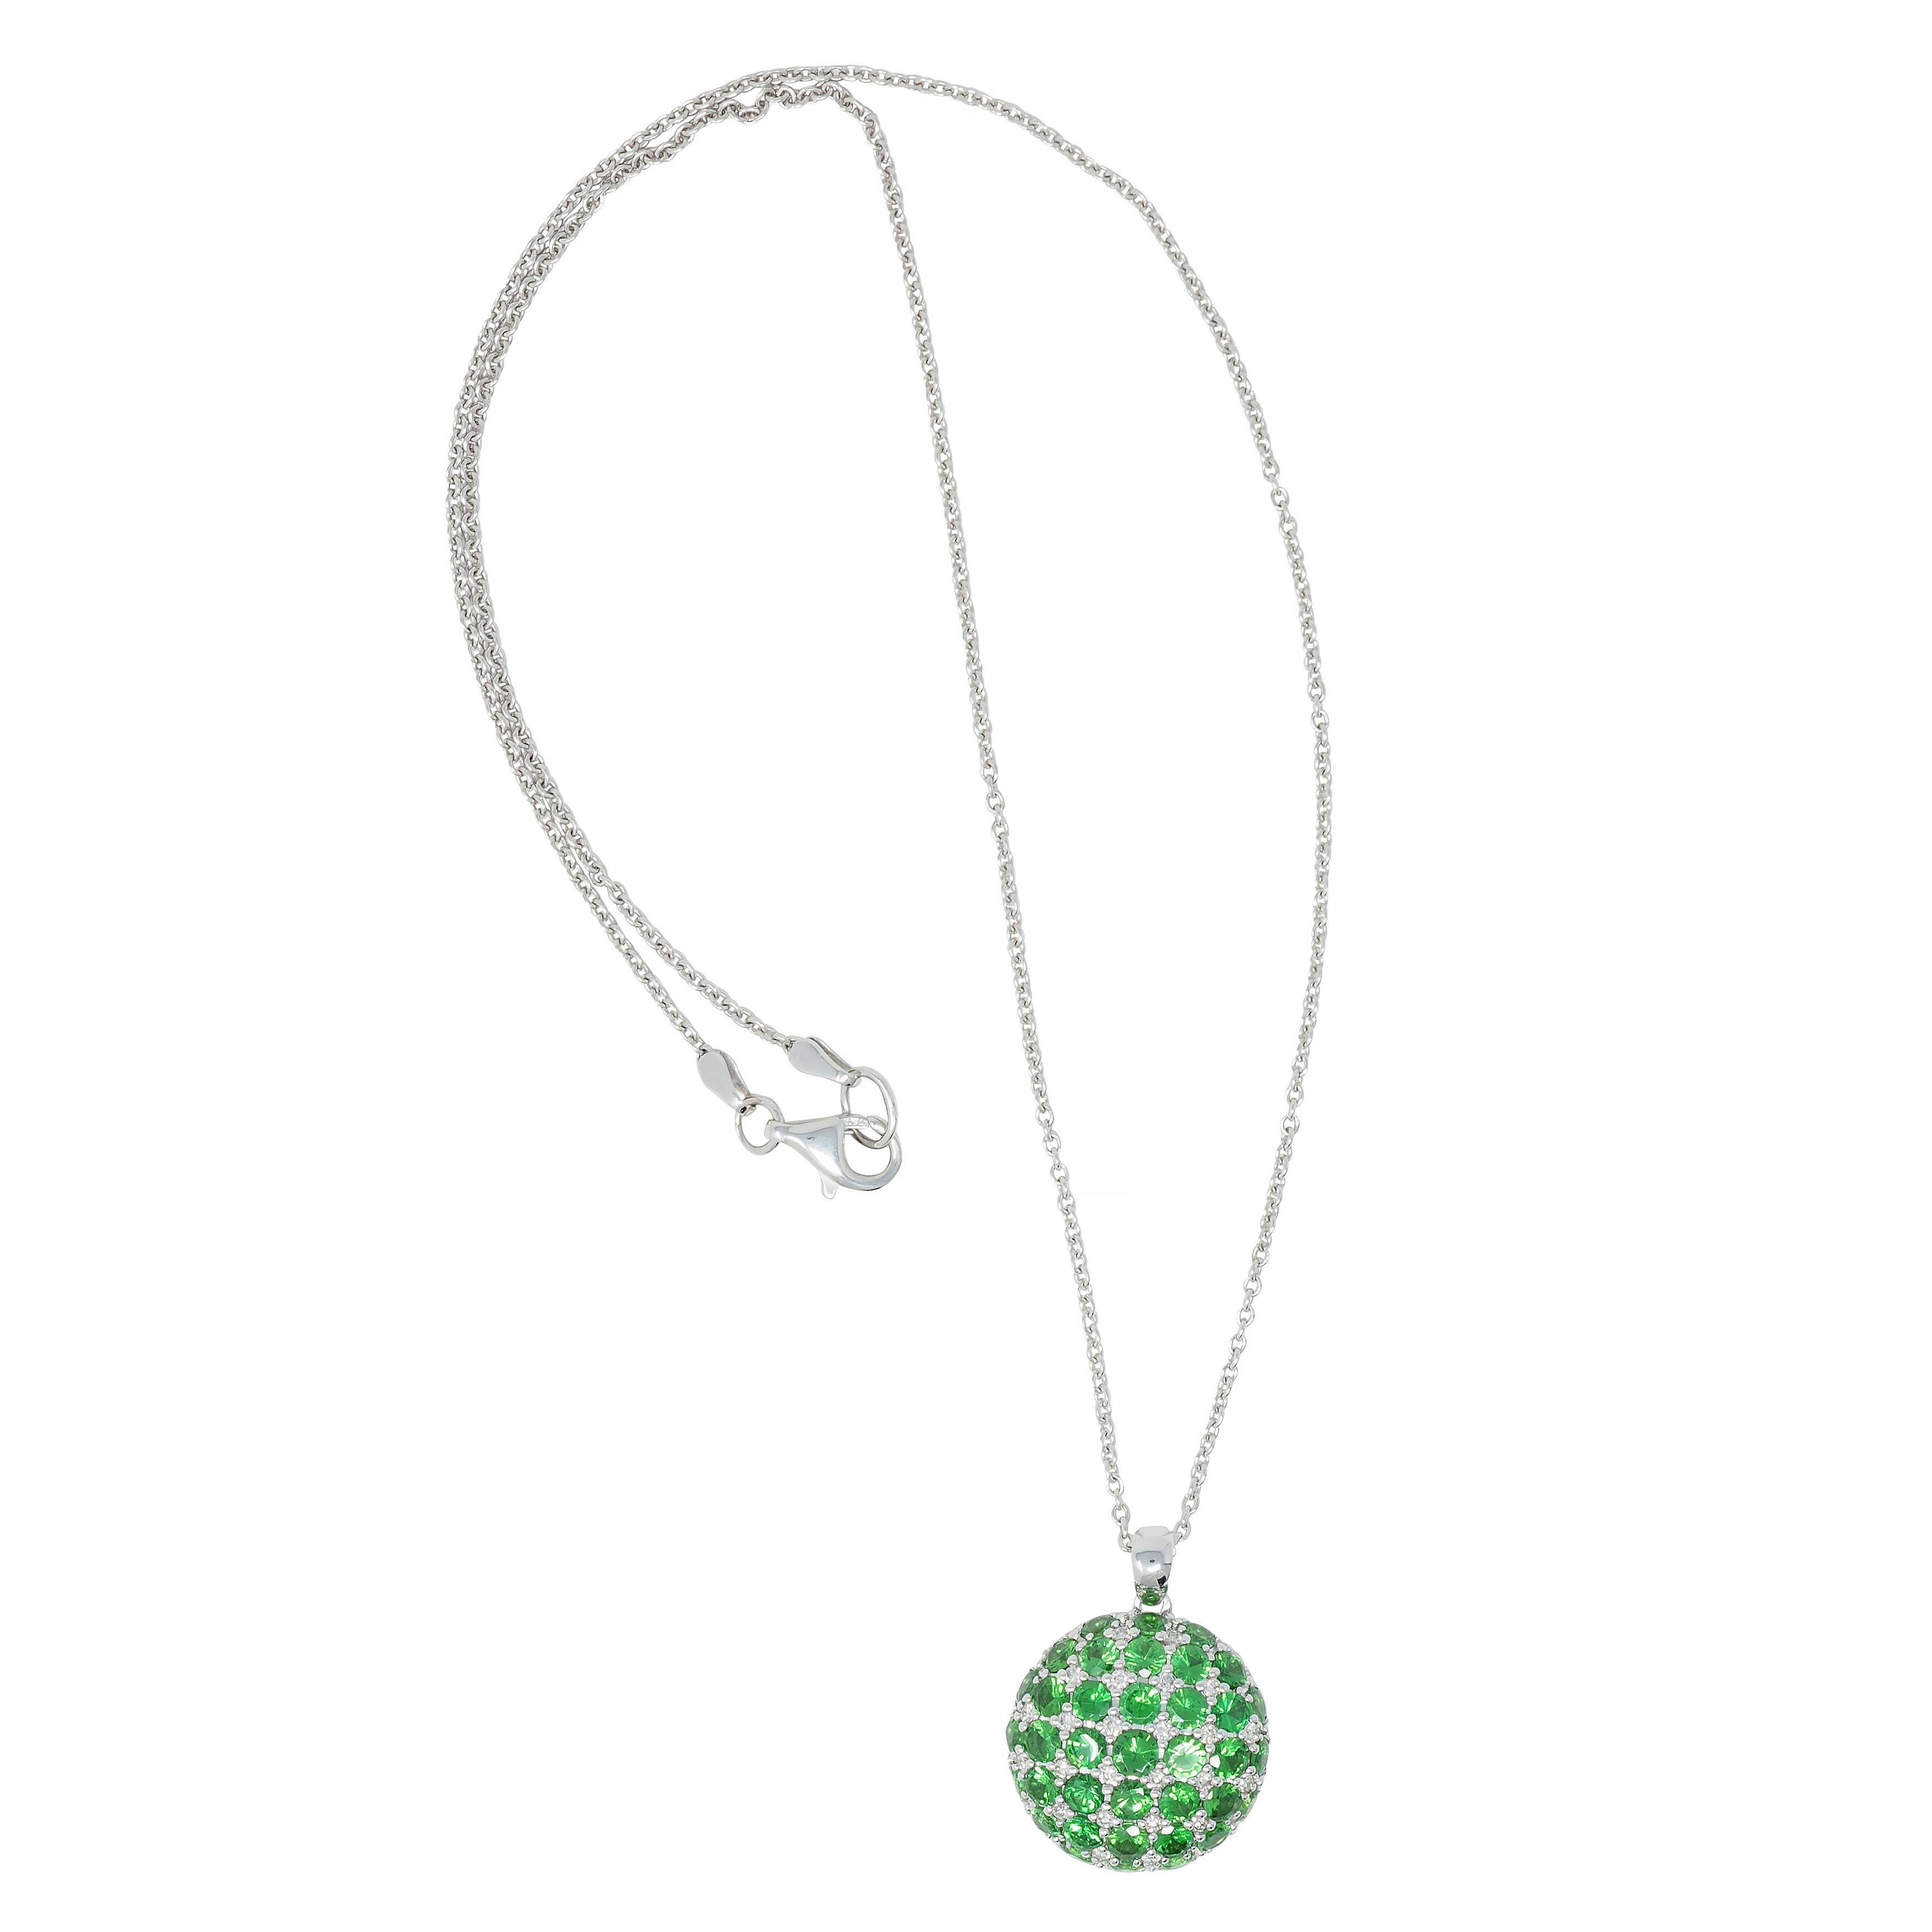 Comprised of 1.0 mm cable link chain suspending a round domed pendant 
Pavé set throughout with round cut demantoid garnets 
Weighing approximately 2.85 carats total 
Transparent medium green in color 
Reverse is pierced with grid motif
Suspending